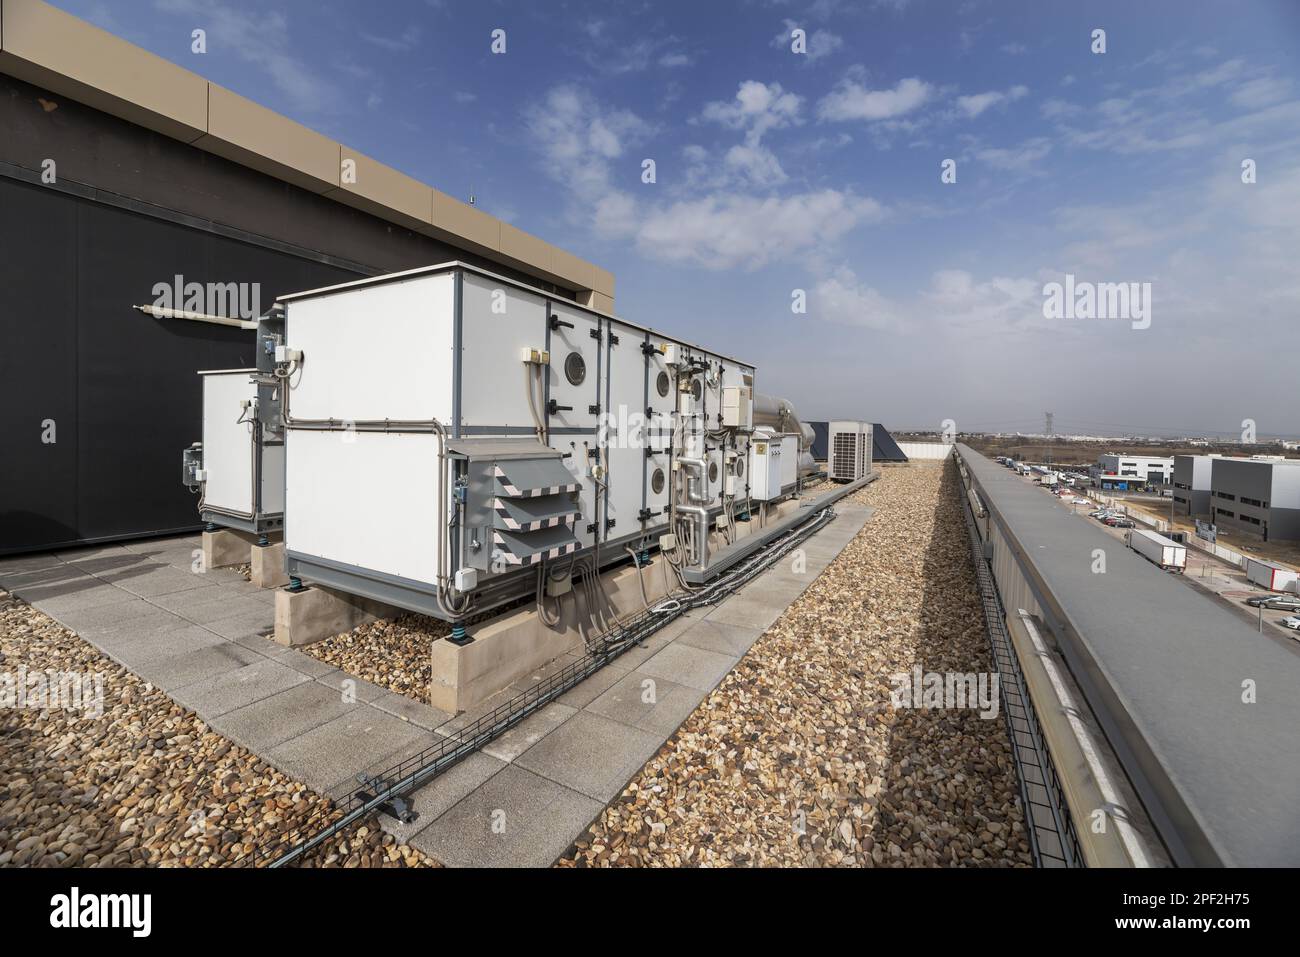 Equipment with filters and air conditioners on the roof of an industrial warehouse with floors full of gravel Stock Photo